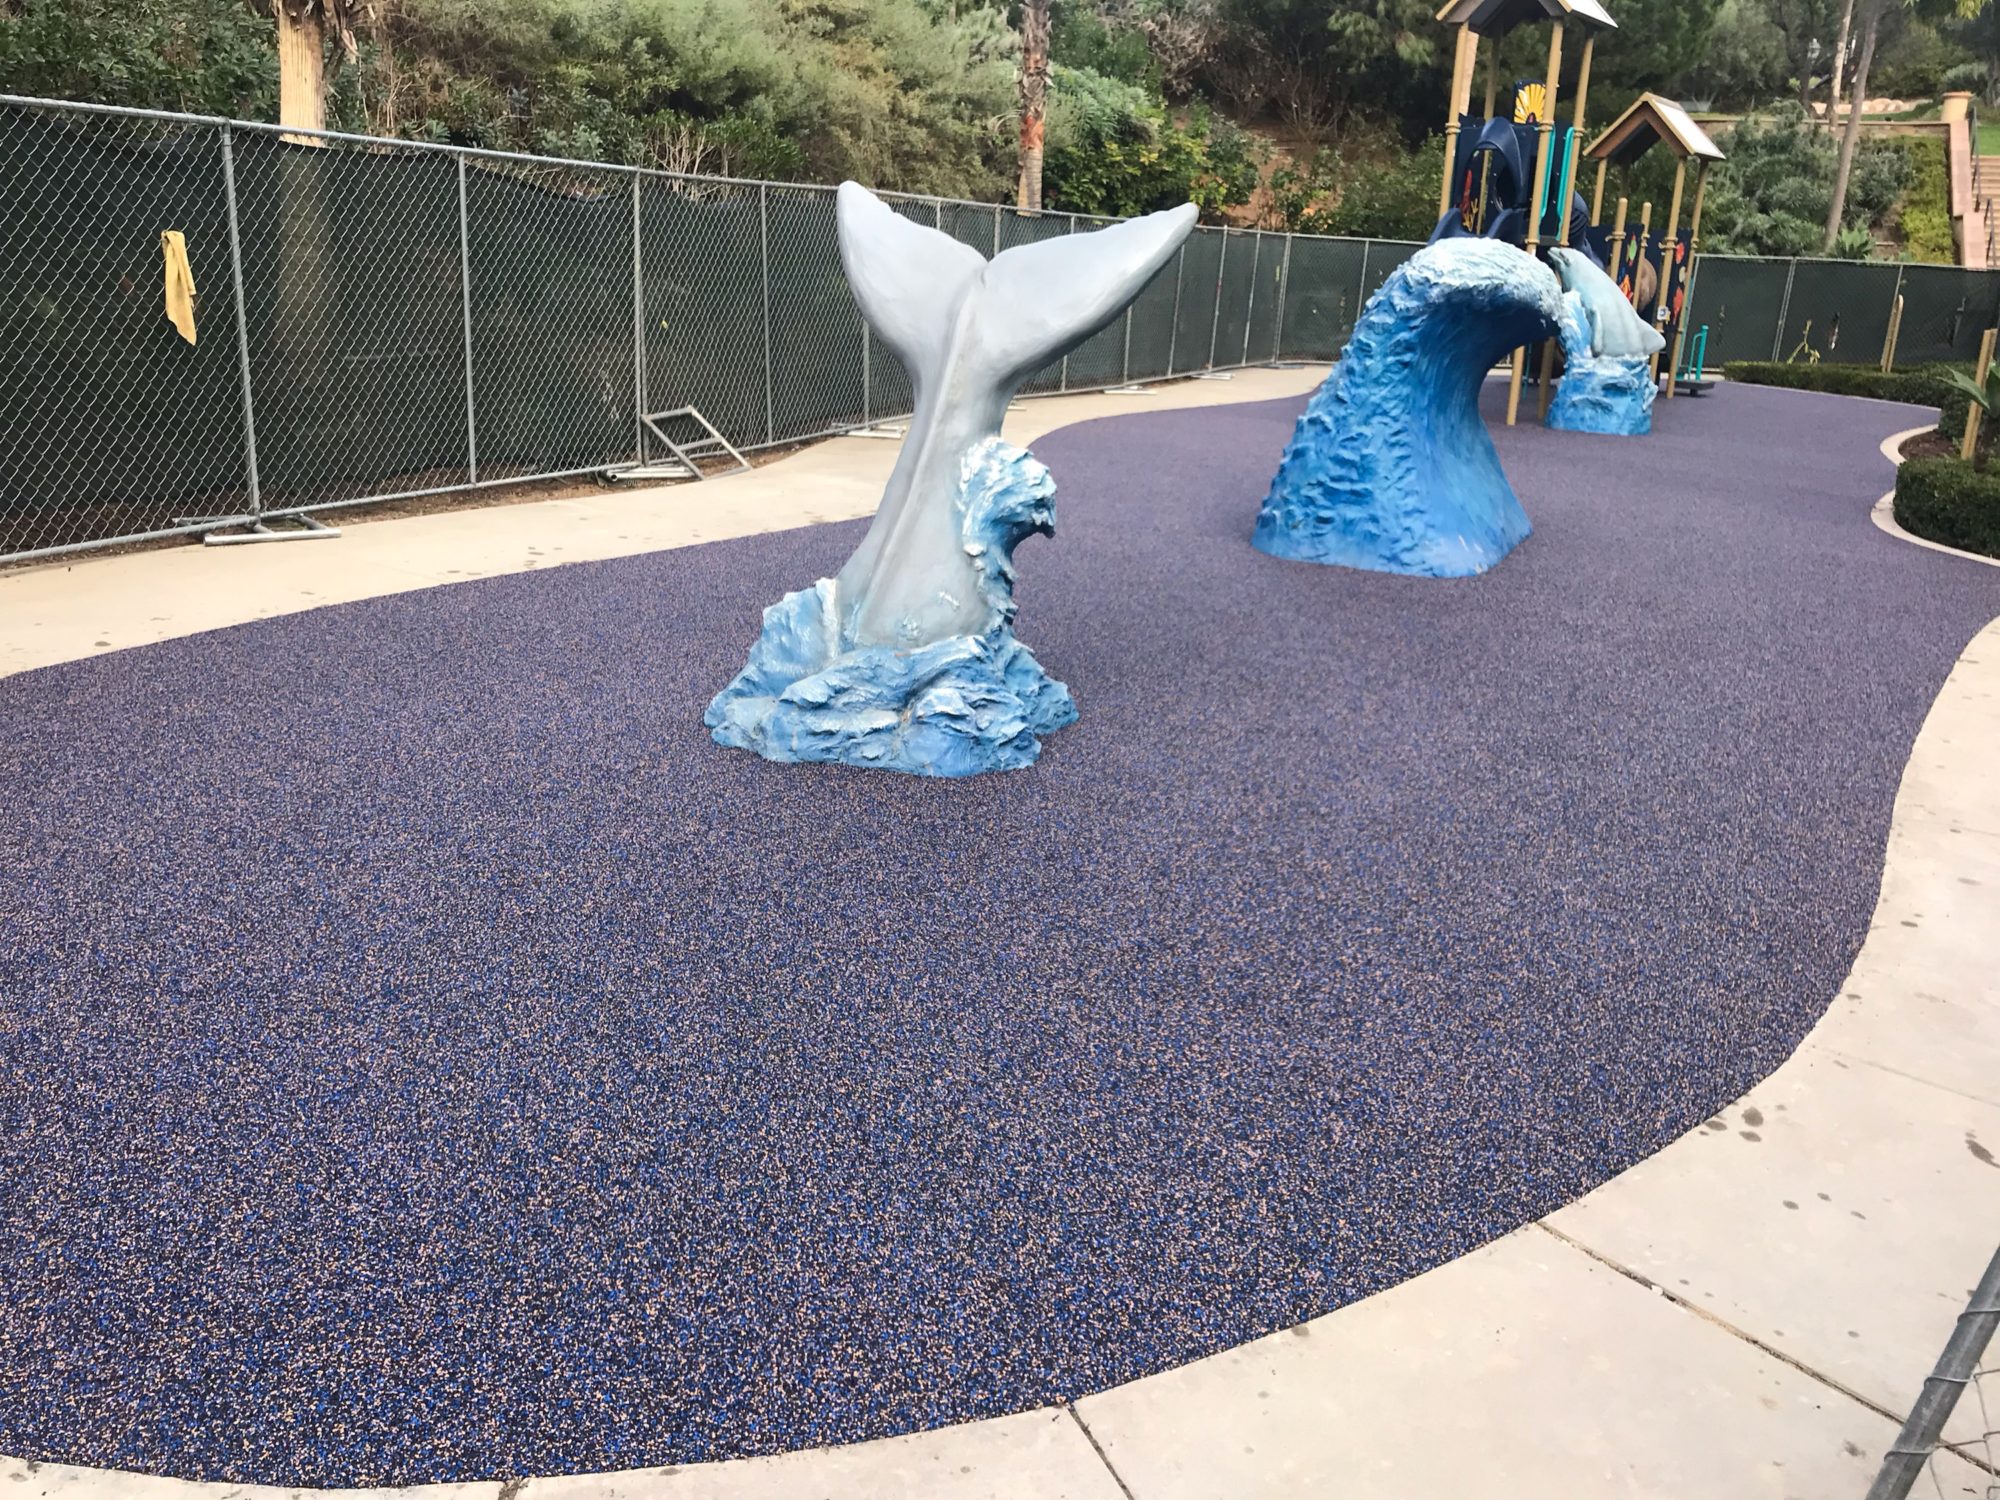 Whale tail at sea themed playground